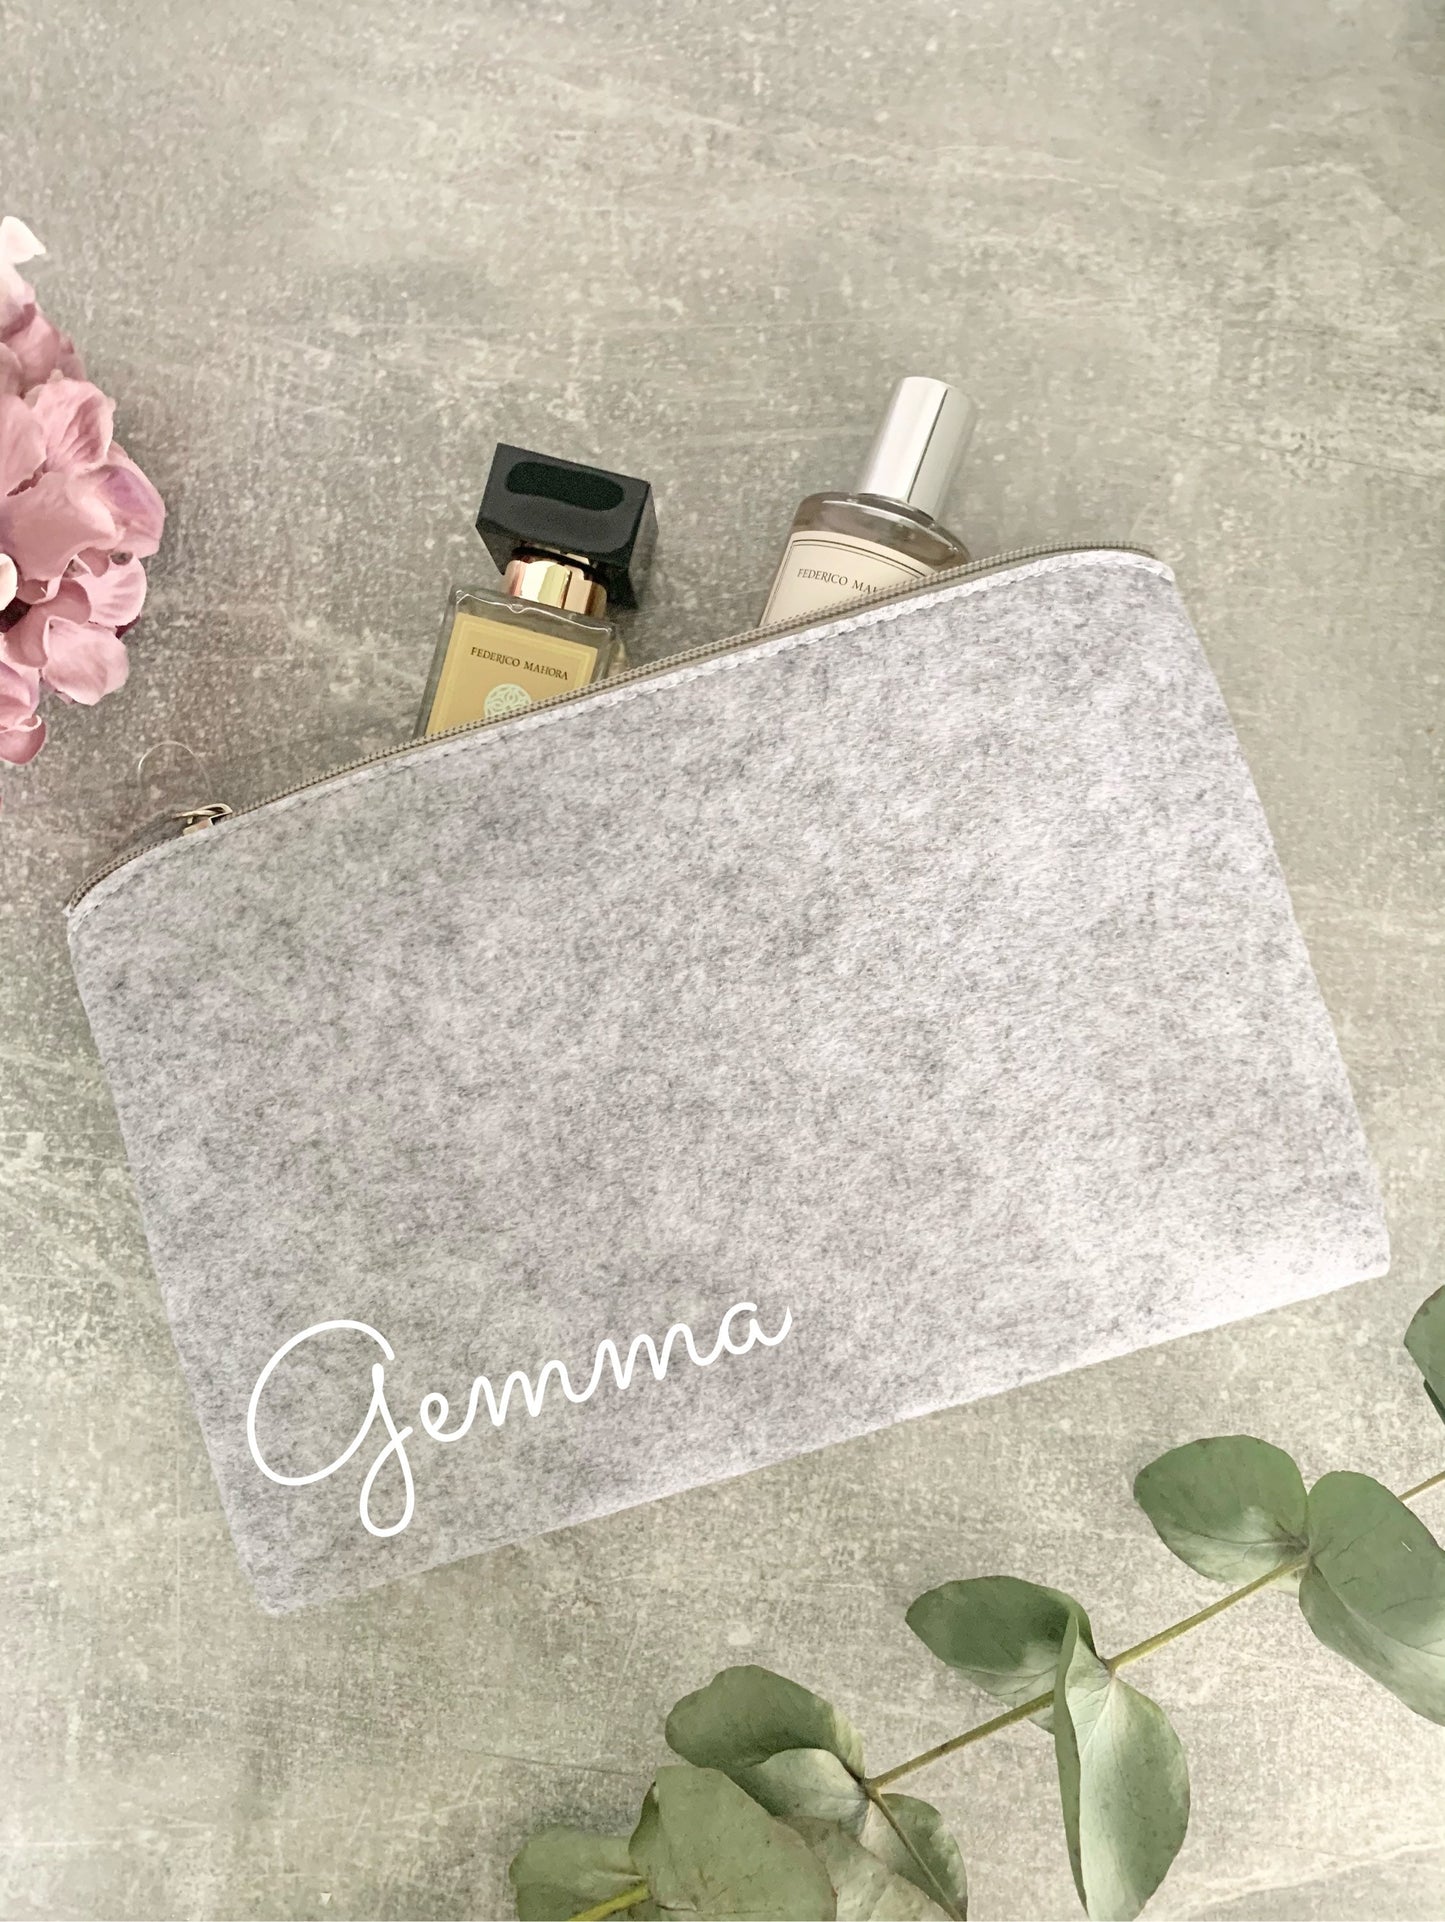 Personalised make up perfume pouch bag, grey felt case, birthday gift for her, bridesmaid gift, Mother’s Day gifts, toiletry case